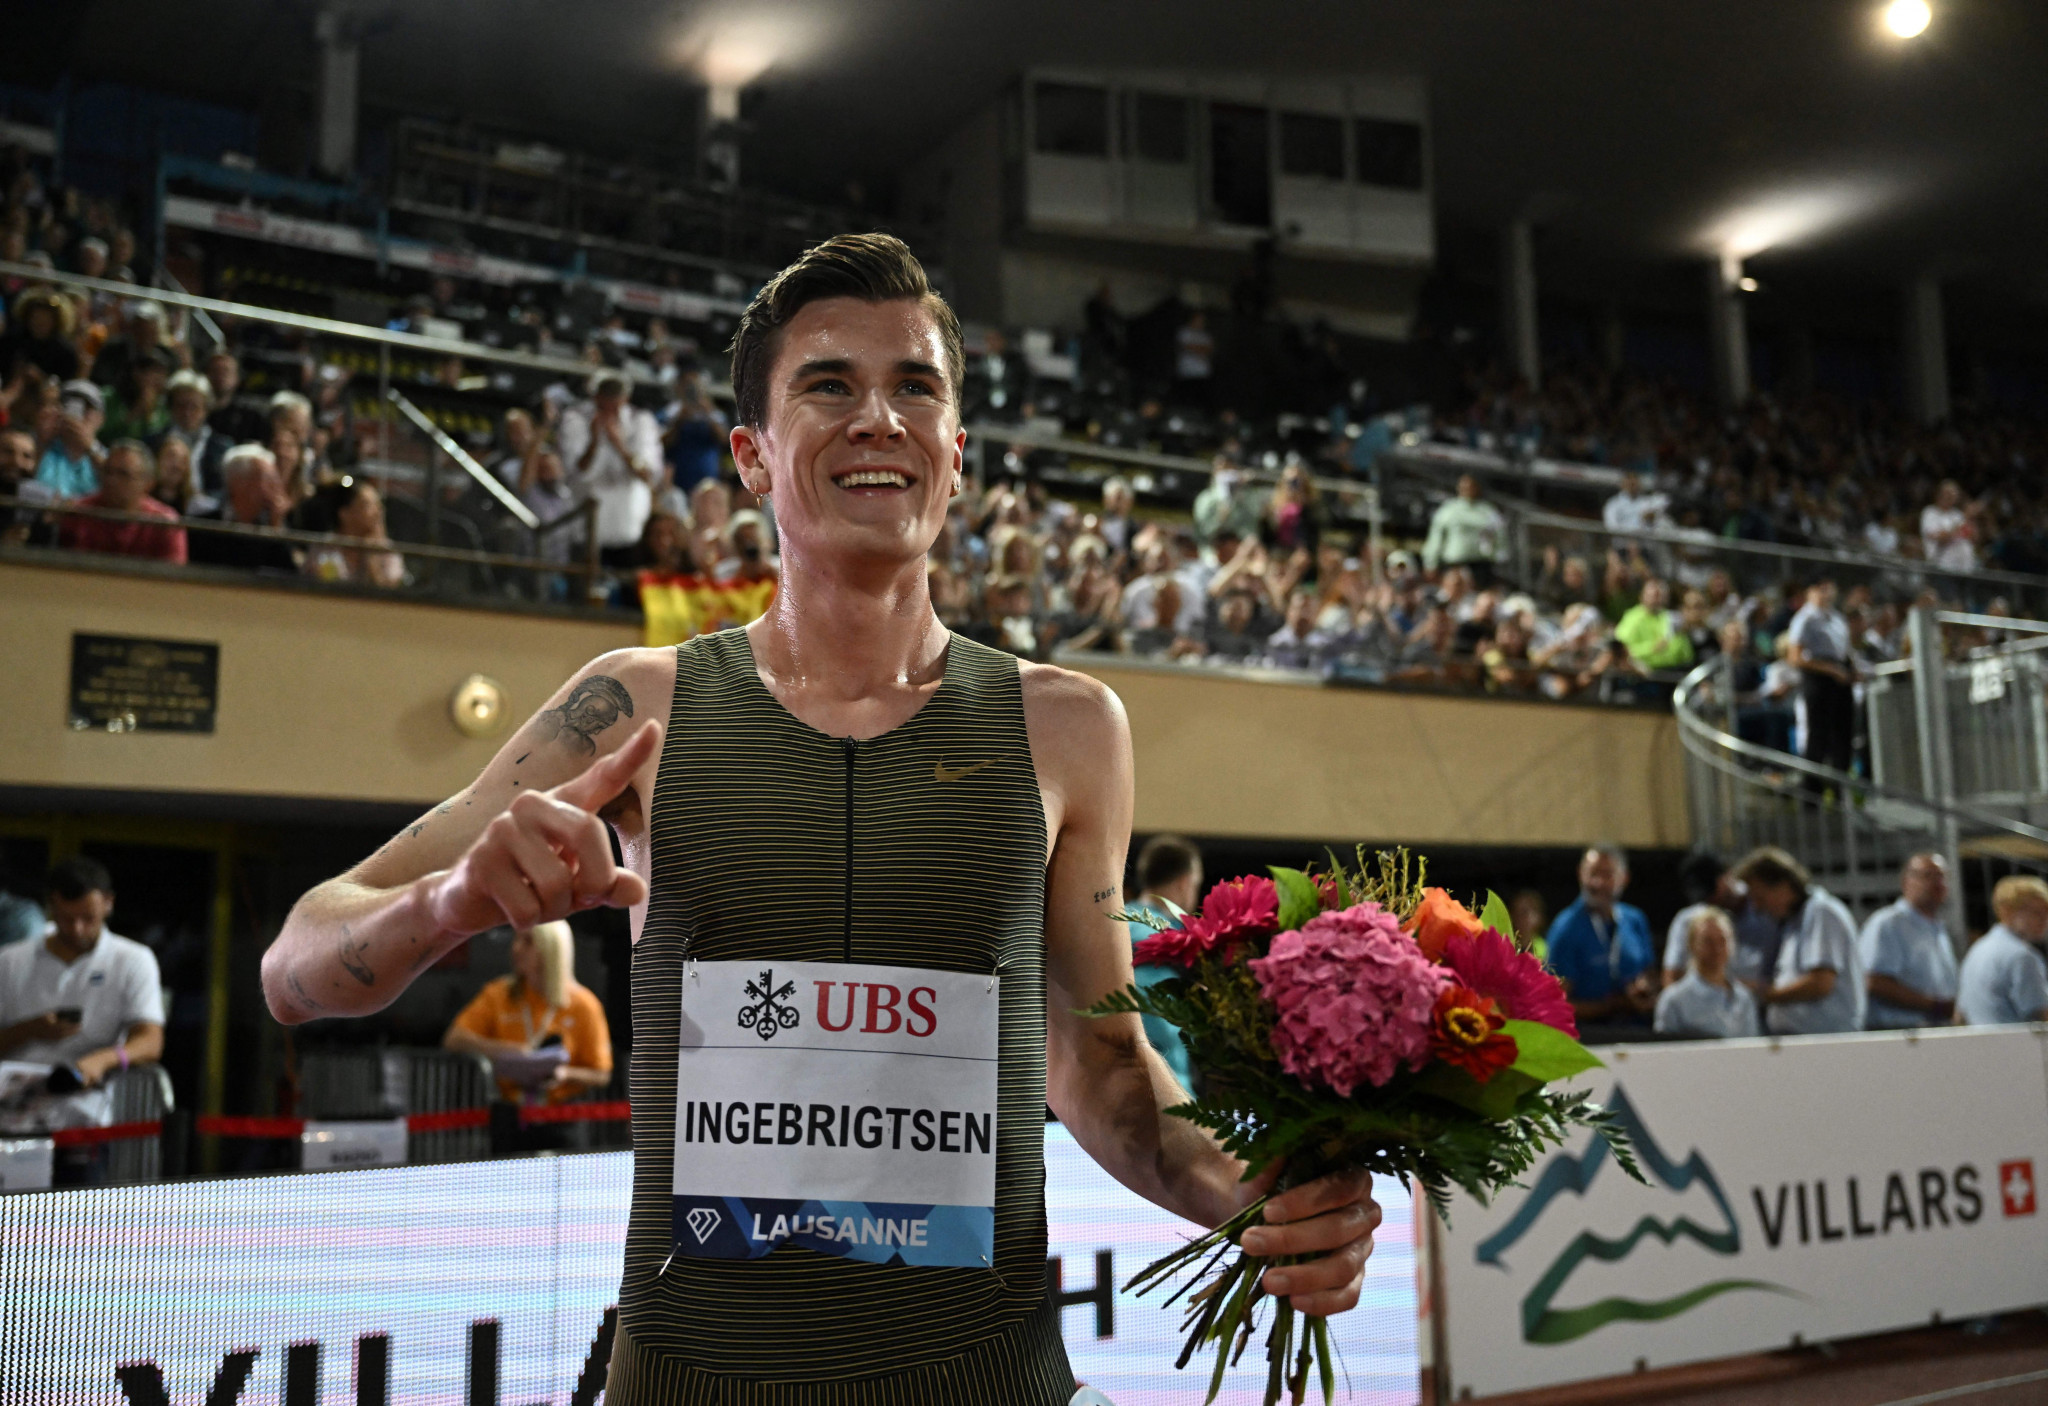 Ingebrigtsen sets fastest 1500m time of 2022 at Lausanne Diamond League as Lyles wins the hard way